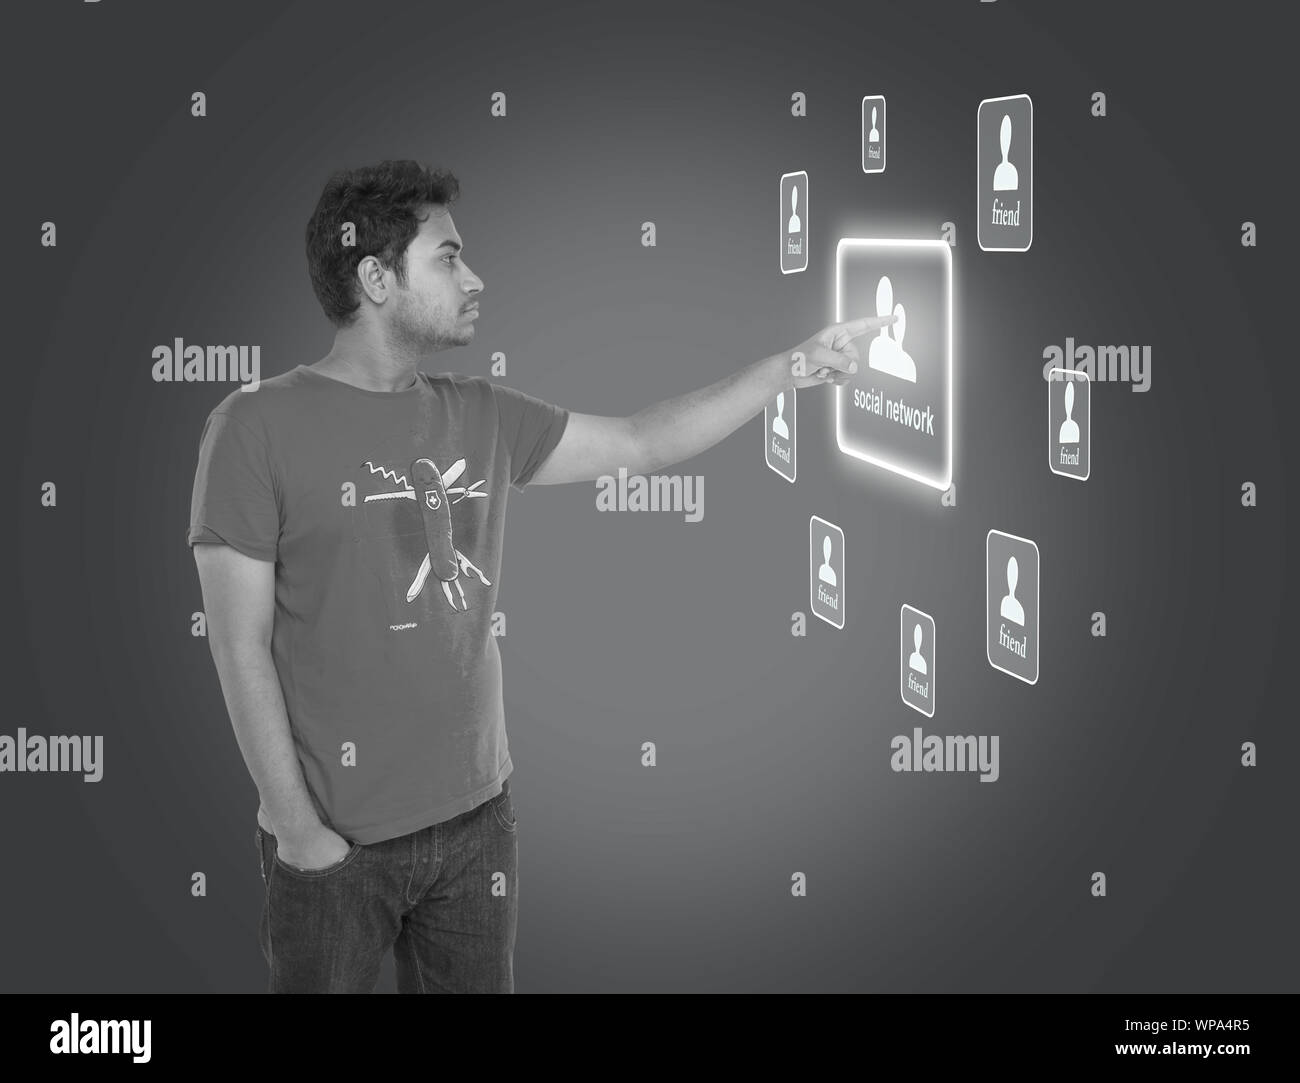 Young man using a touch screen Stock Photo